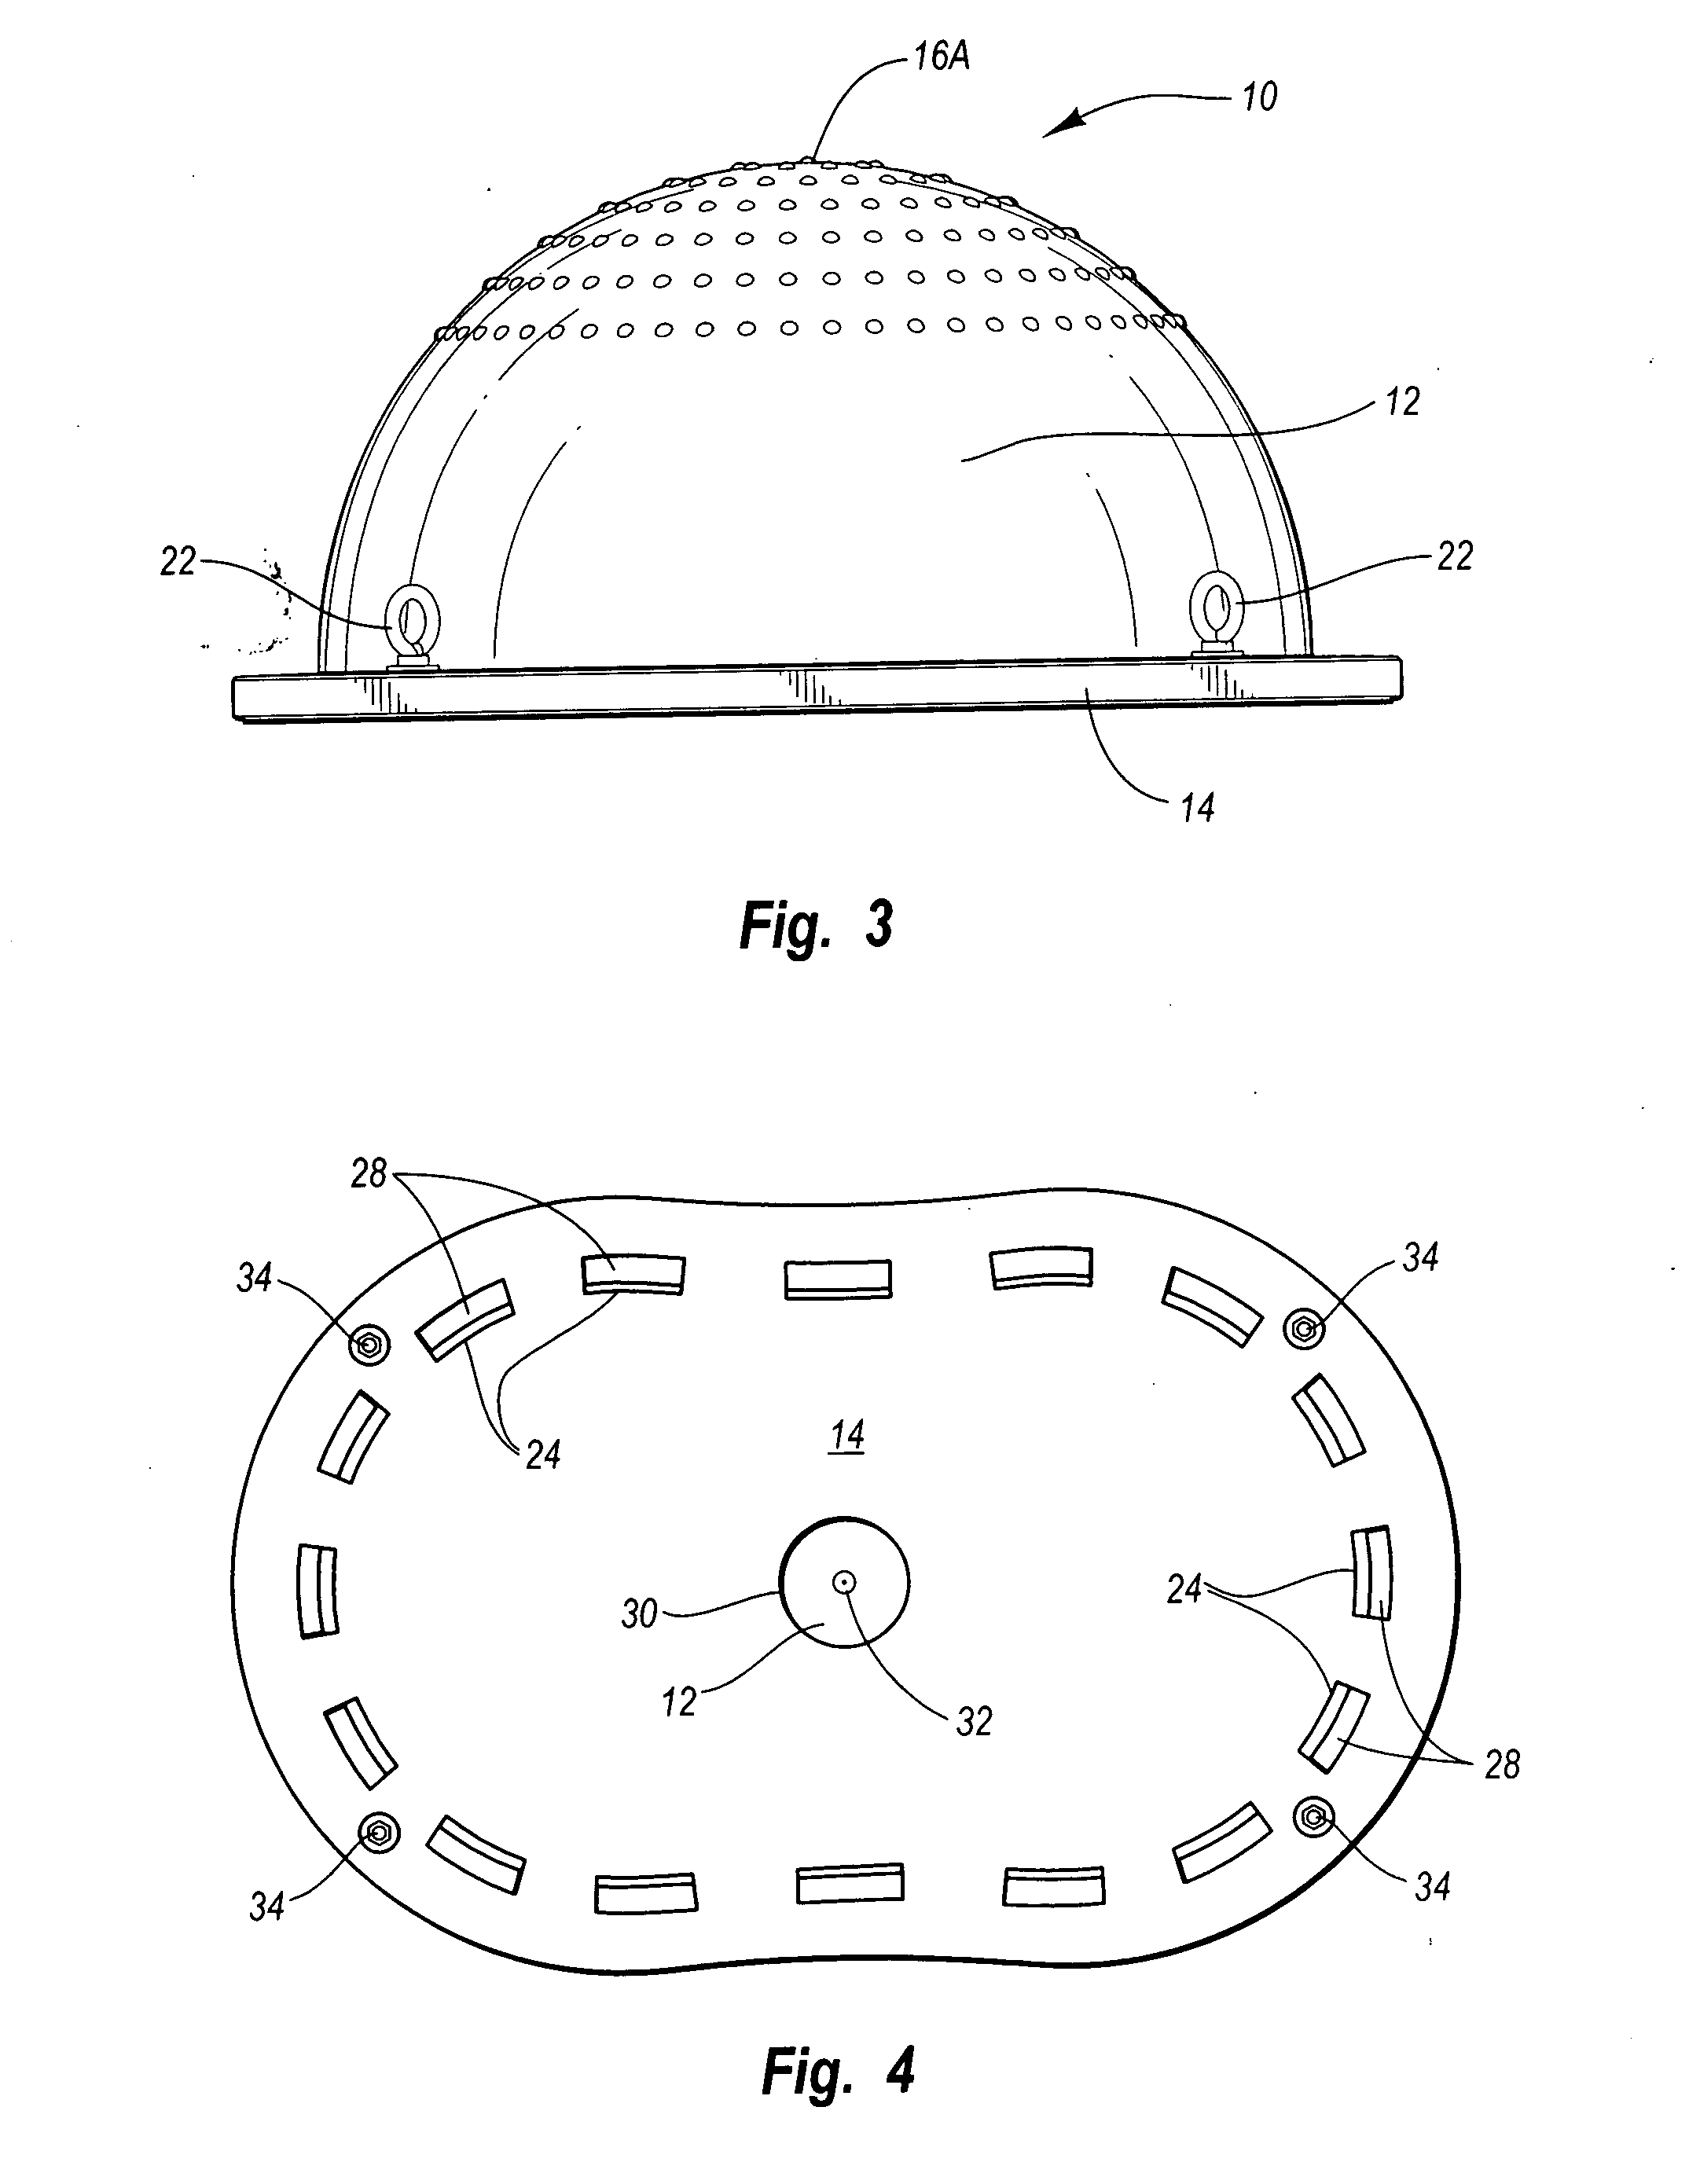 Exercise device with elongate flexible member